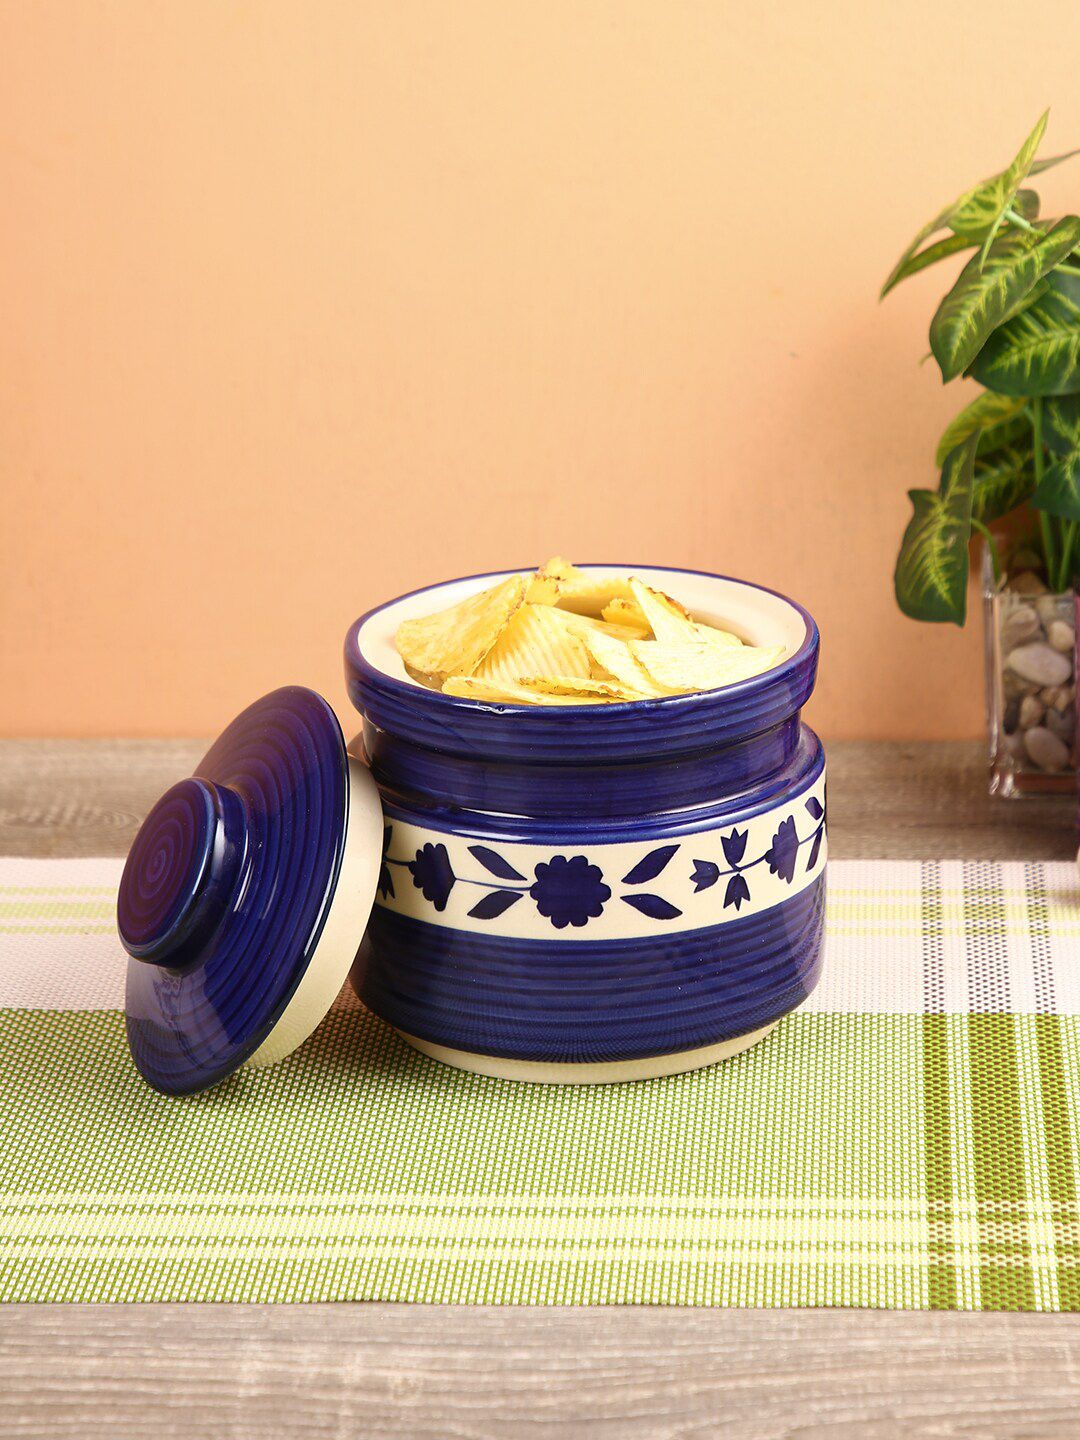 Aapno Rajasthan Blue & White Handcrafted Ceramic Blue Pottery Canister With Lid Price in India